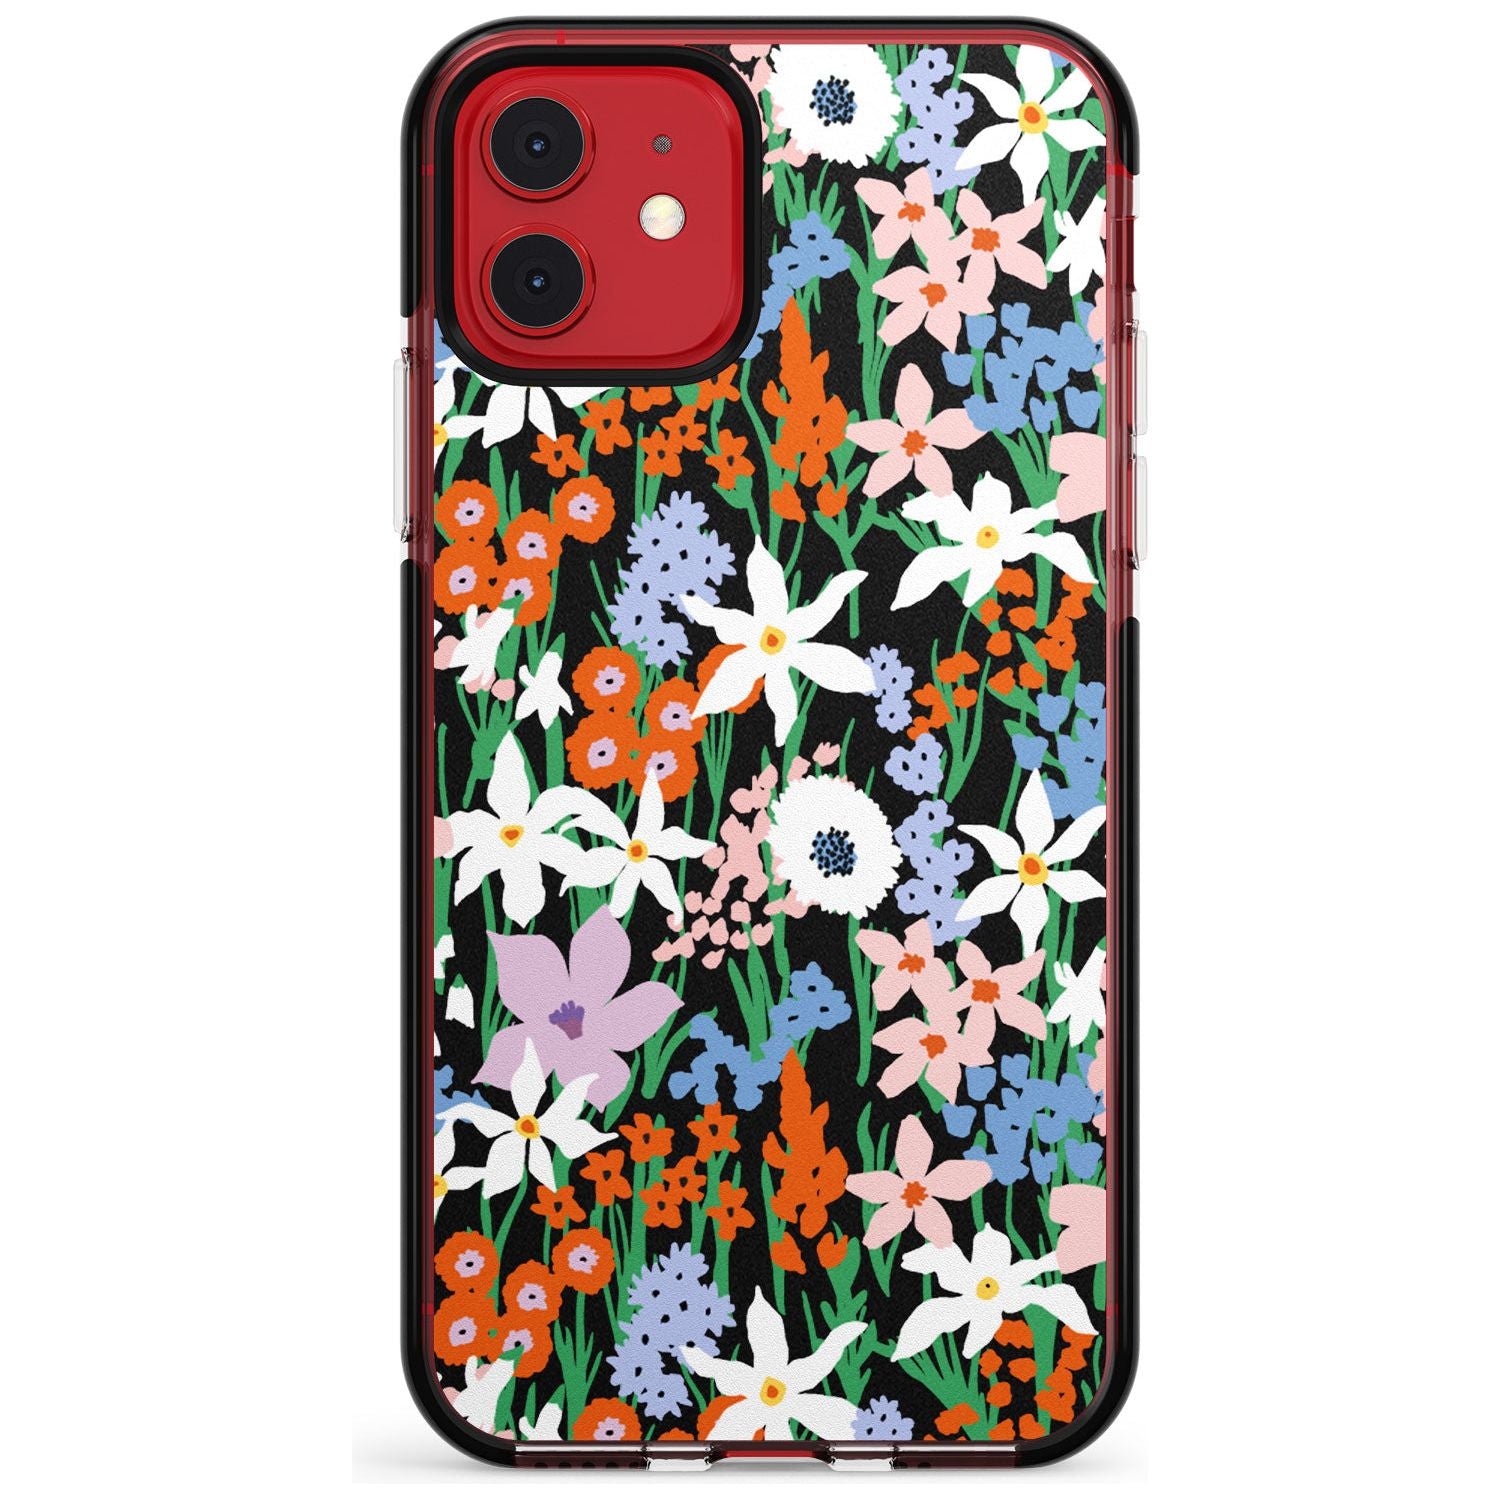 Springtime Meadow: Solid Pink Fade Impact Phone Case for iPhone 11 Pro Max